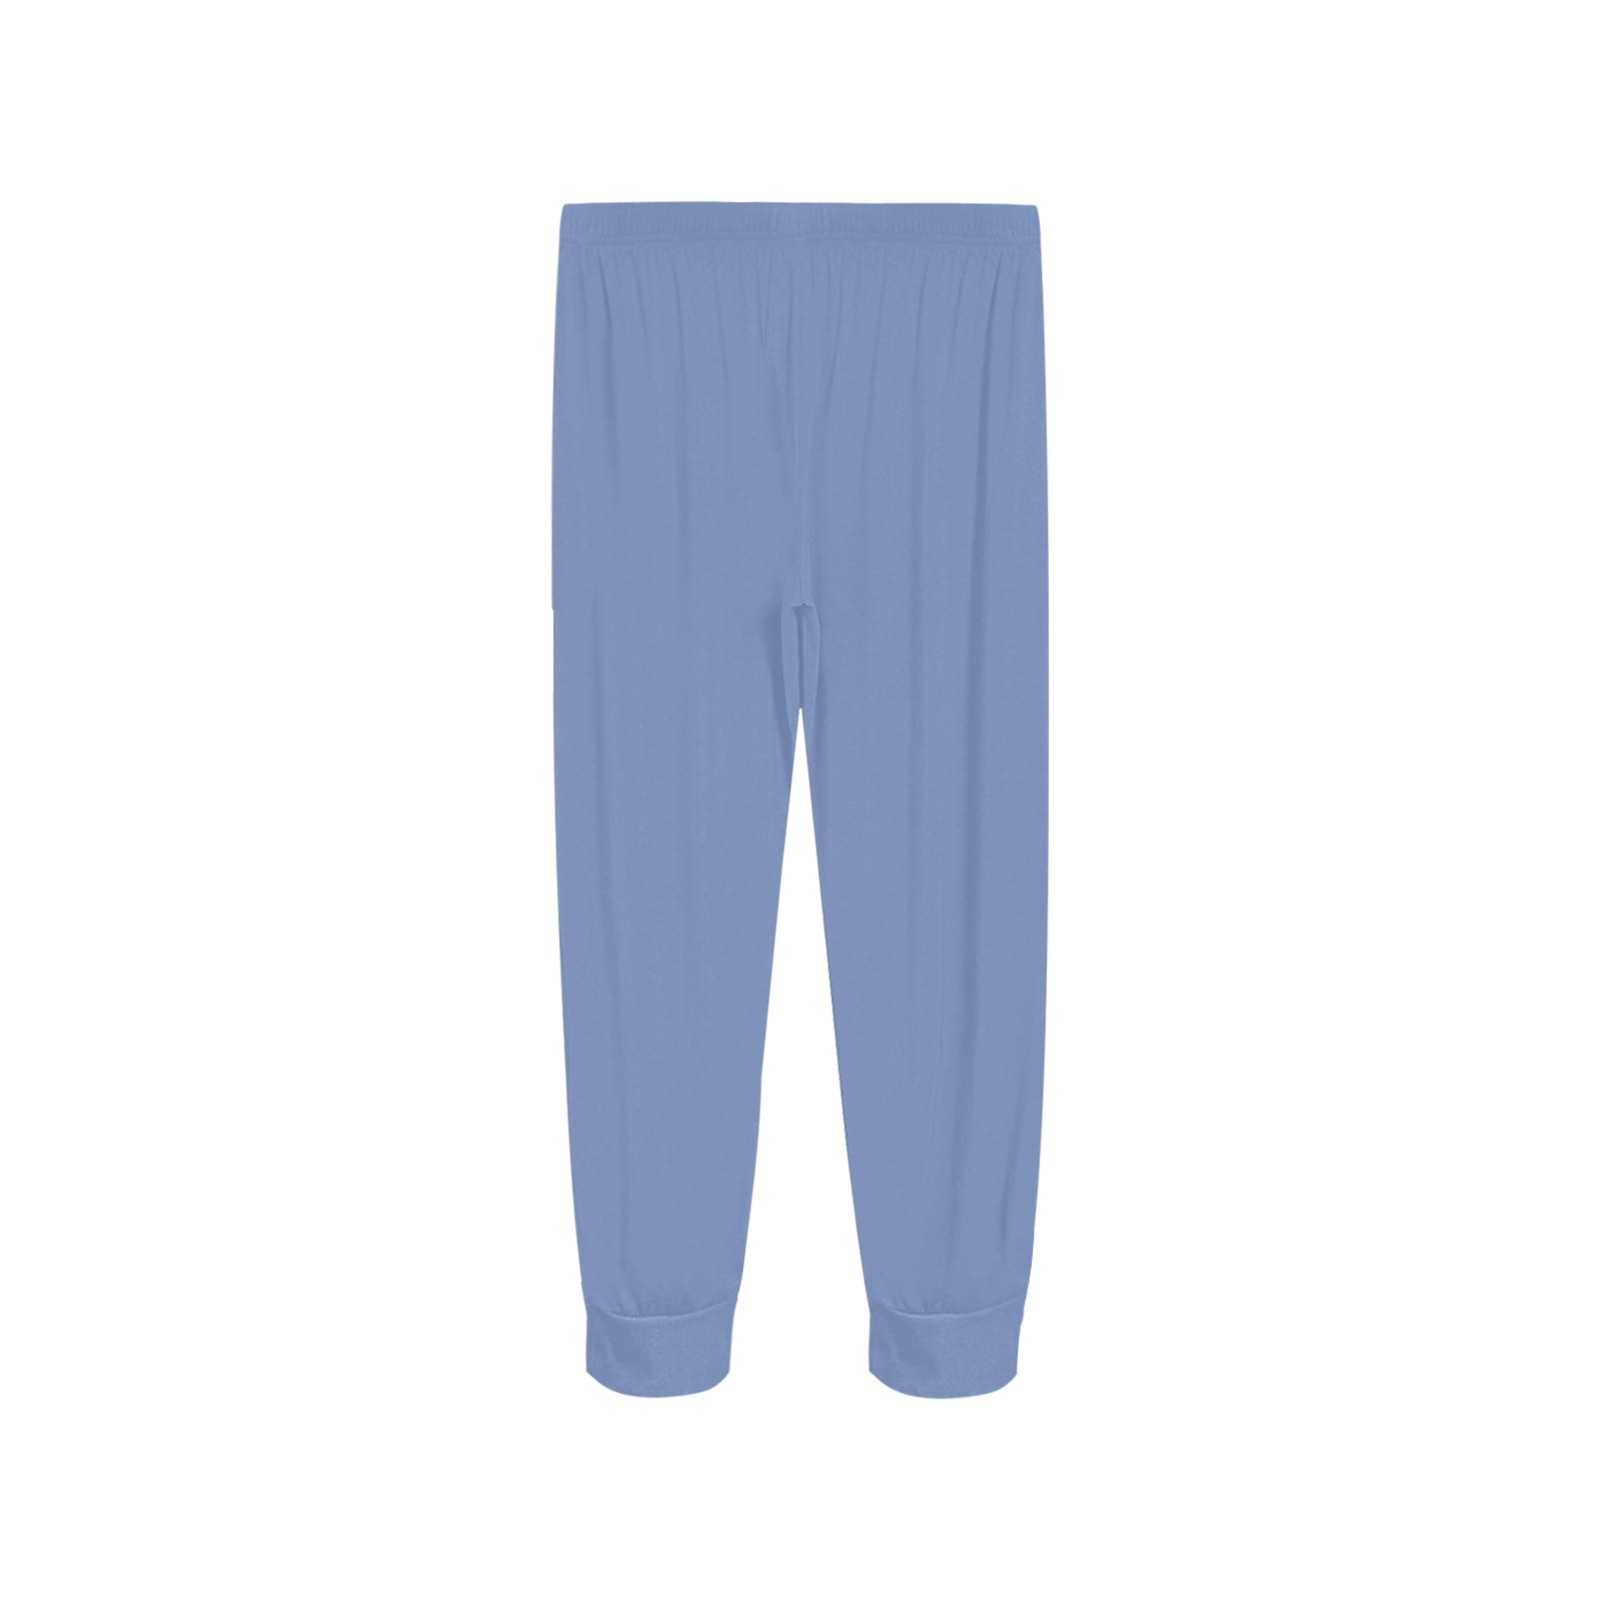 Pants light blue with single logo Women's All Over Print Pajama Trousers